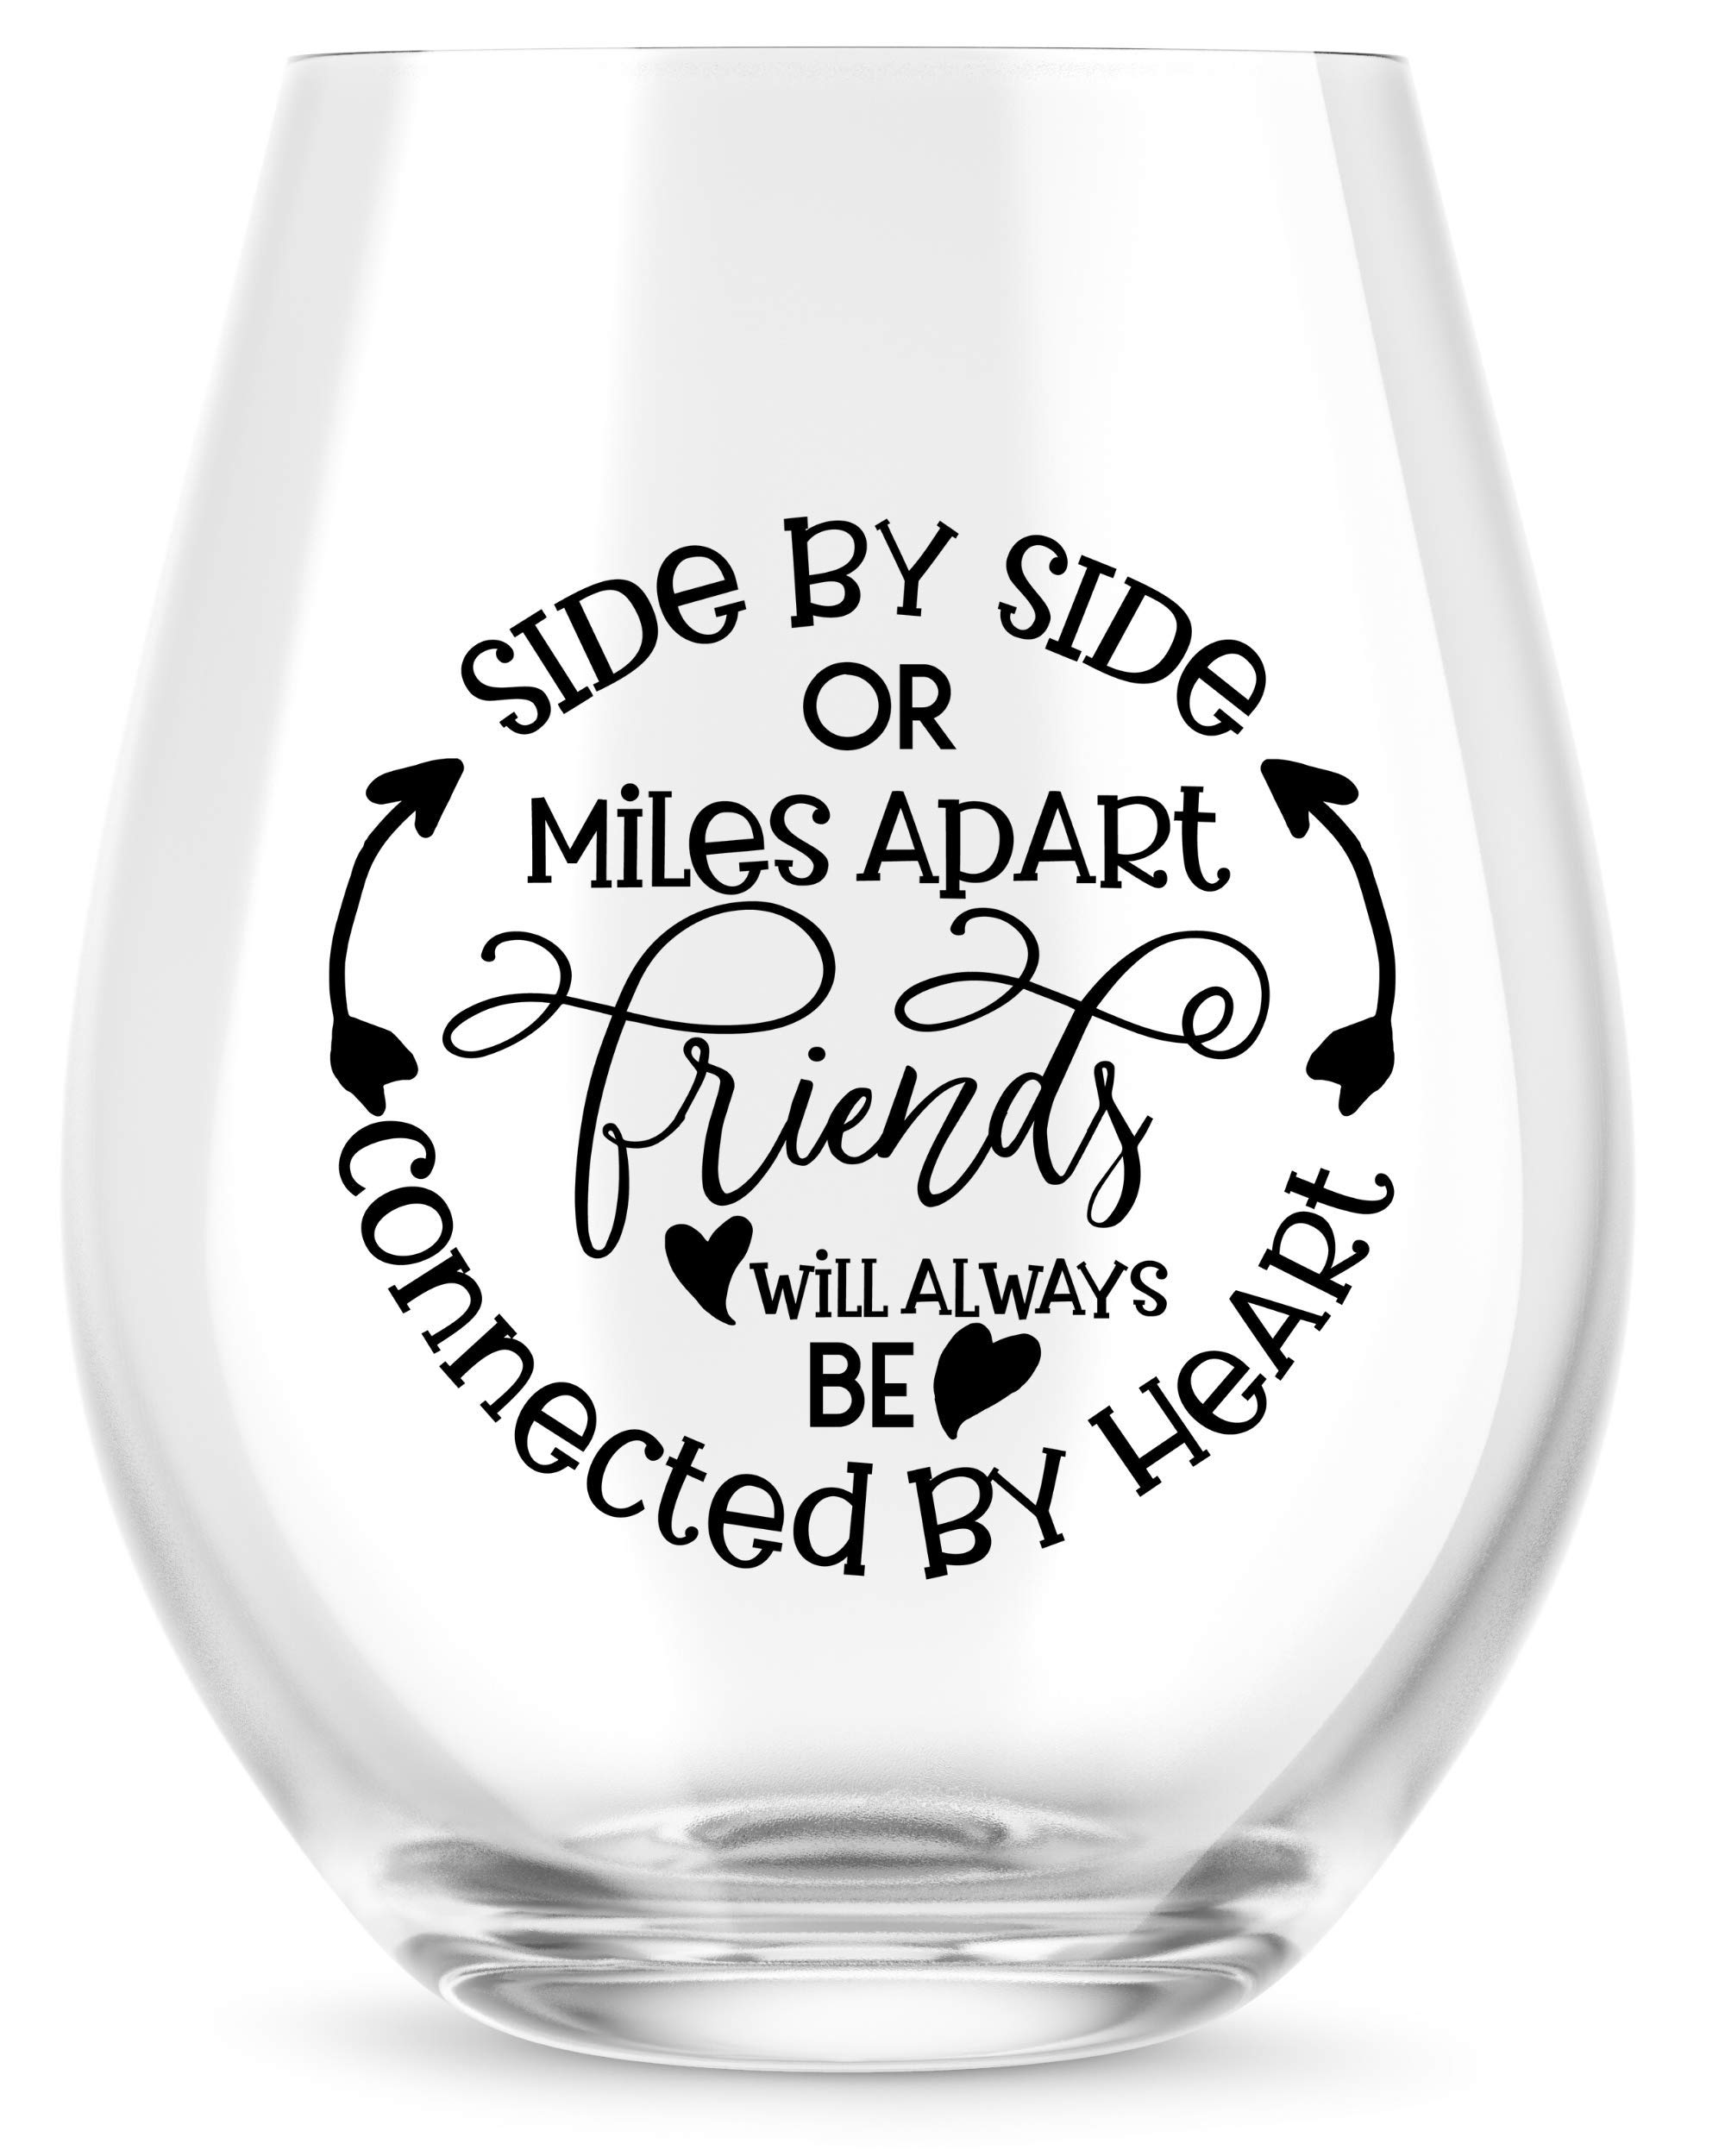 Vivid Ventures Best Friend Wine Glass With Friendship Saying Side By Side Or Miles Apart Best Friend For Women, Sister, Mom, Grandma, Nana, Her